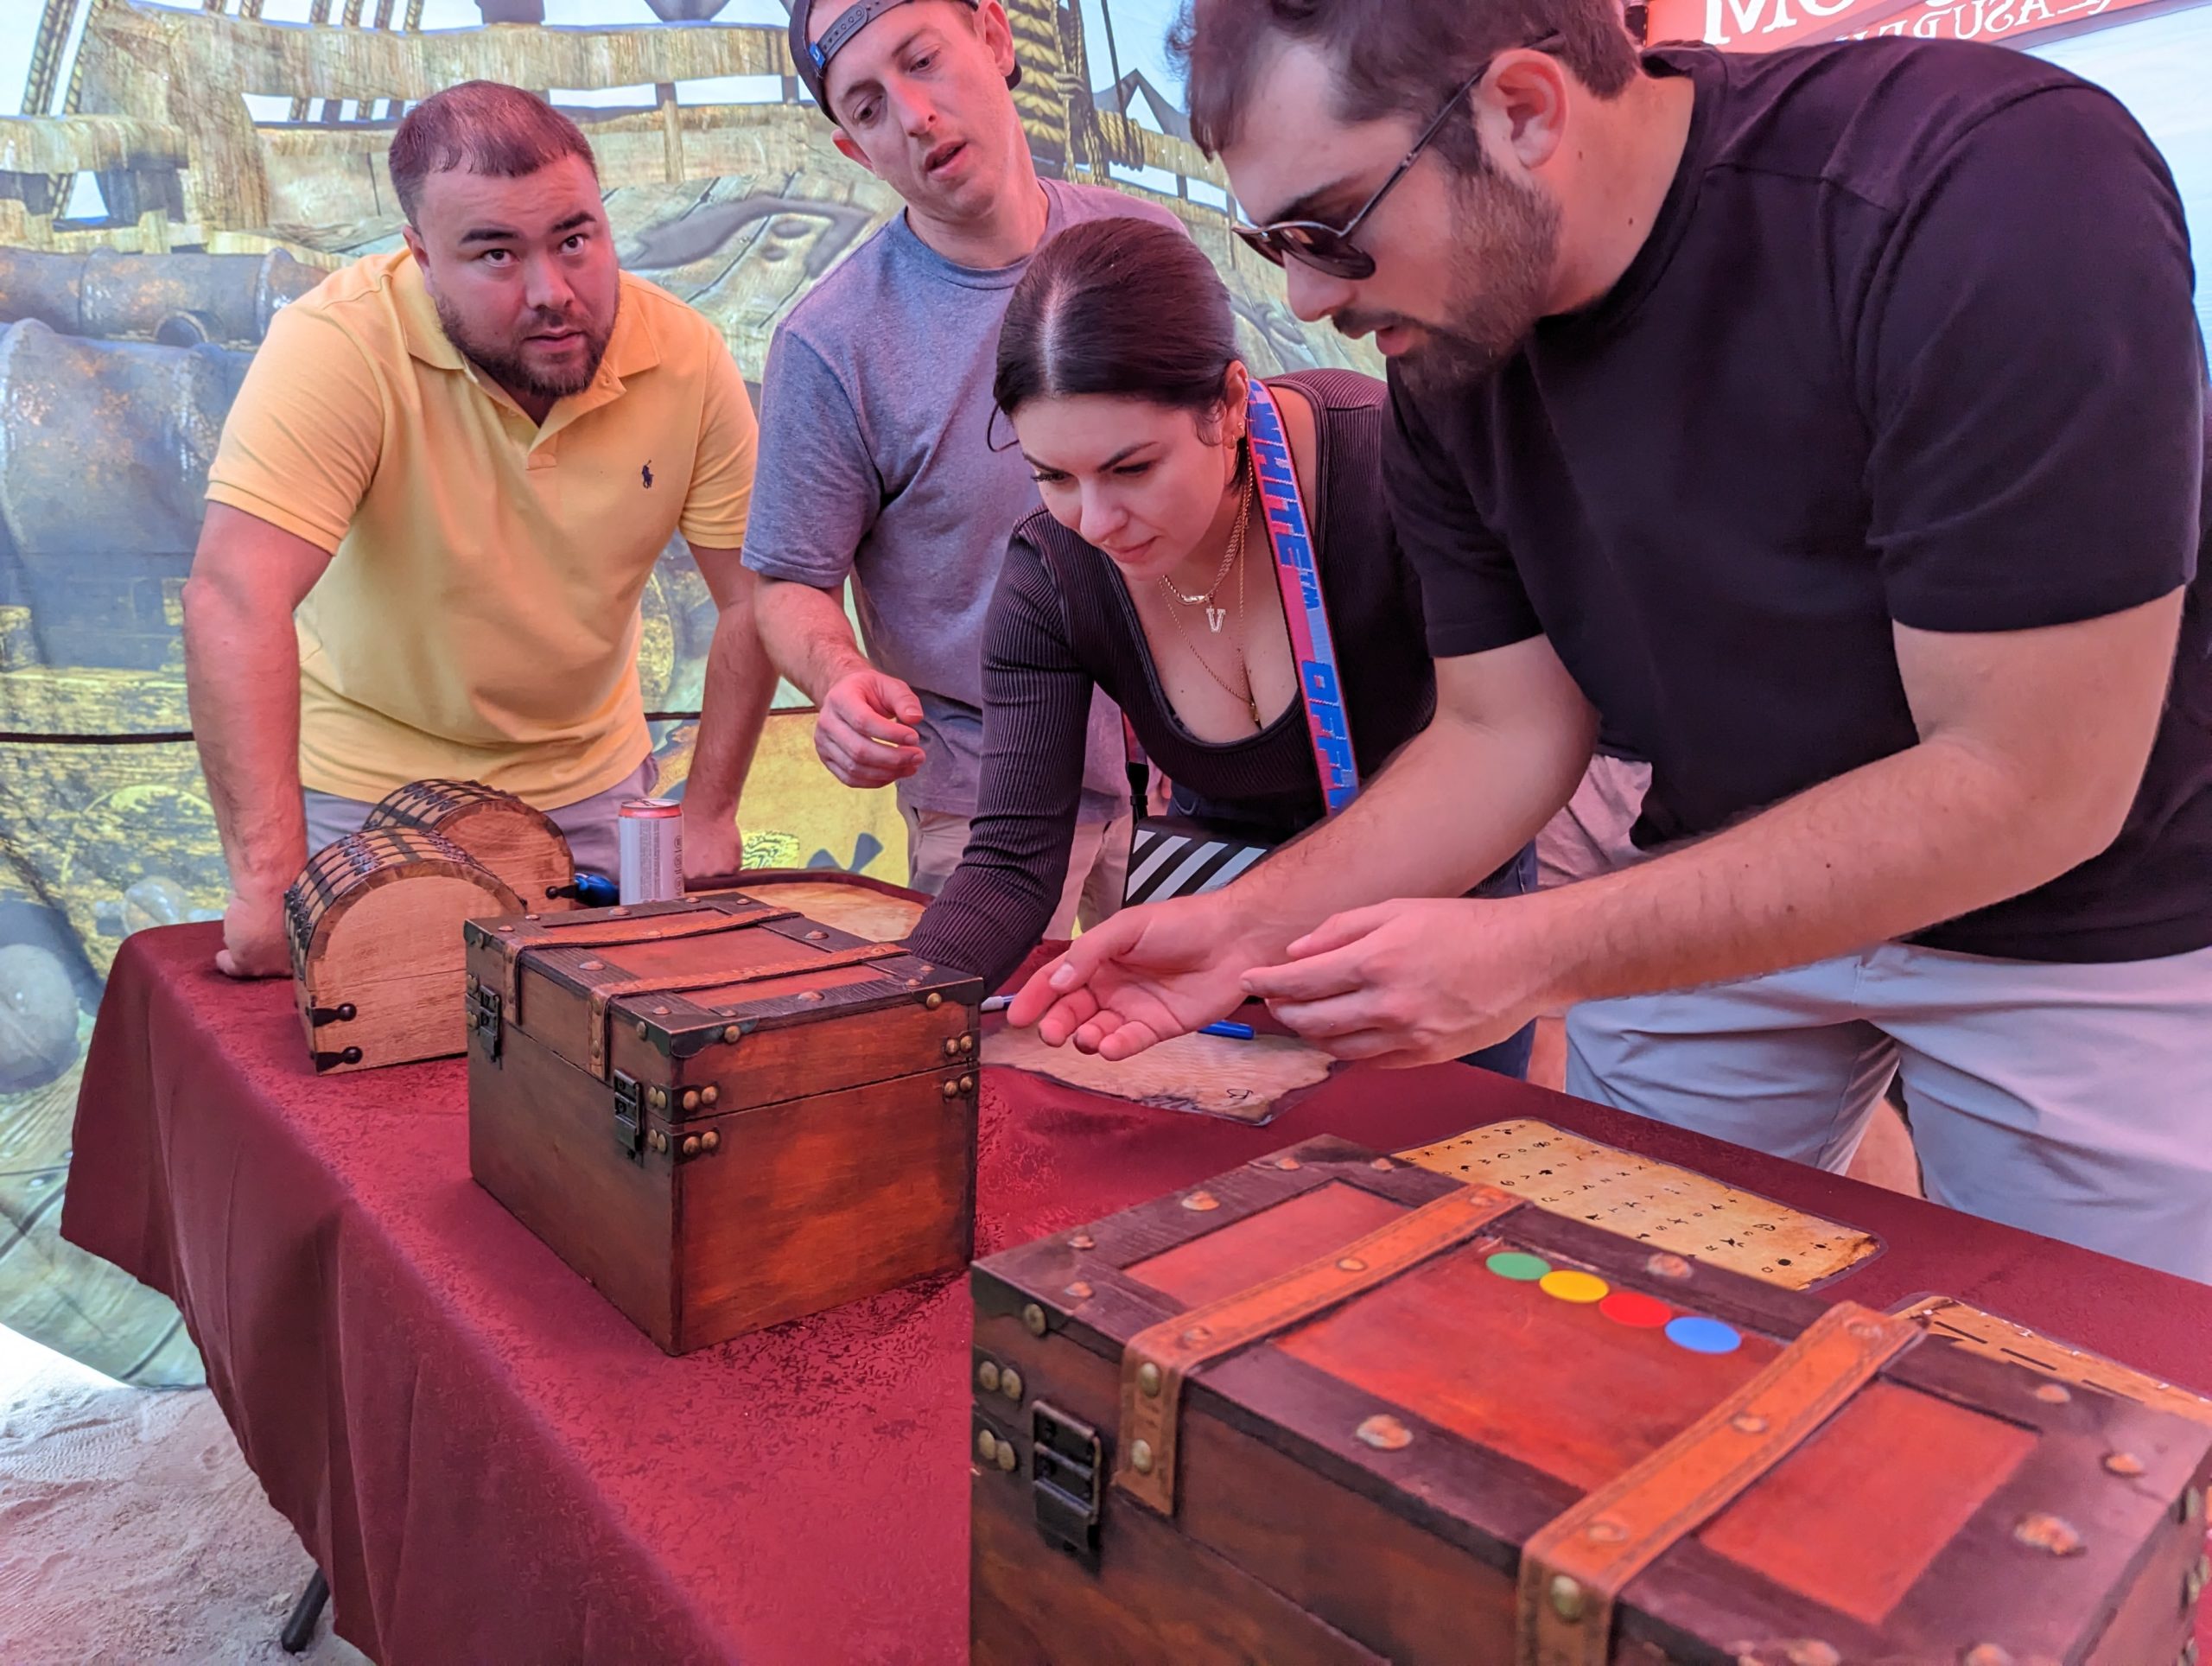 Four people lean over a table filled with treasure chests and paper puzzles.